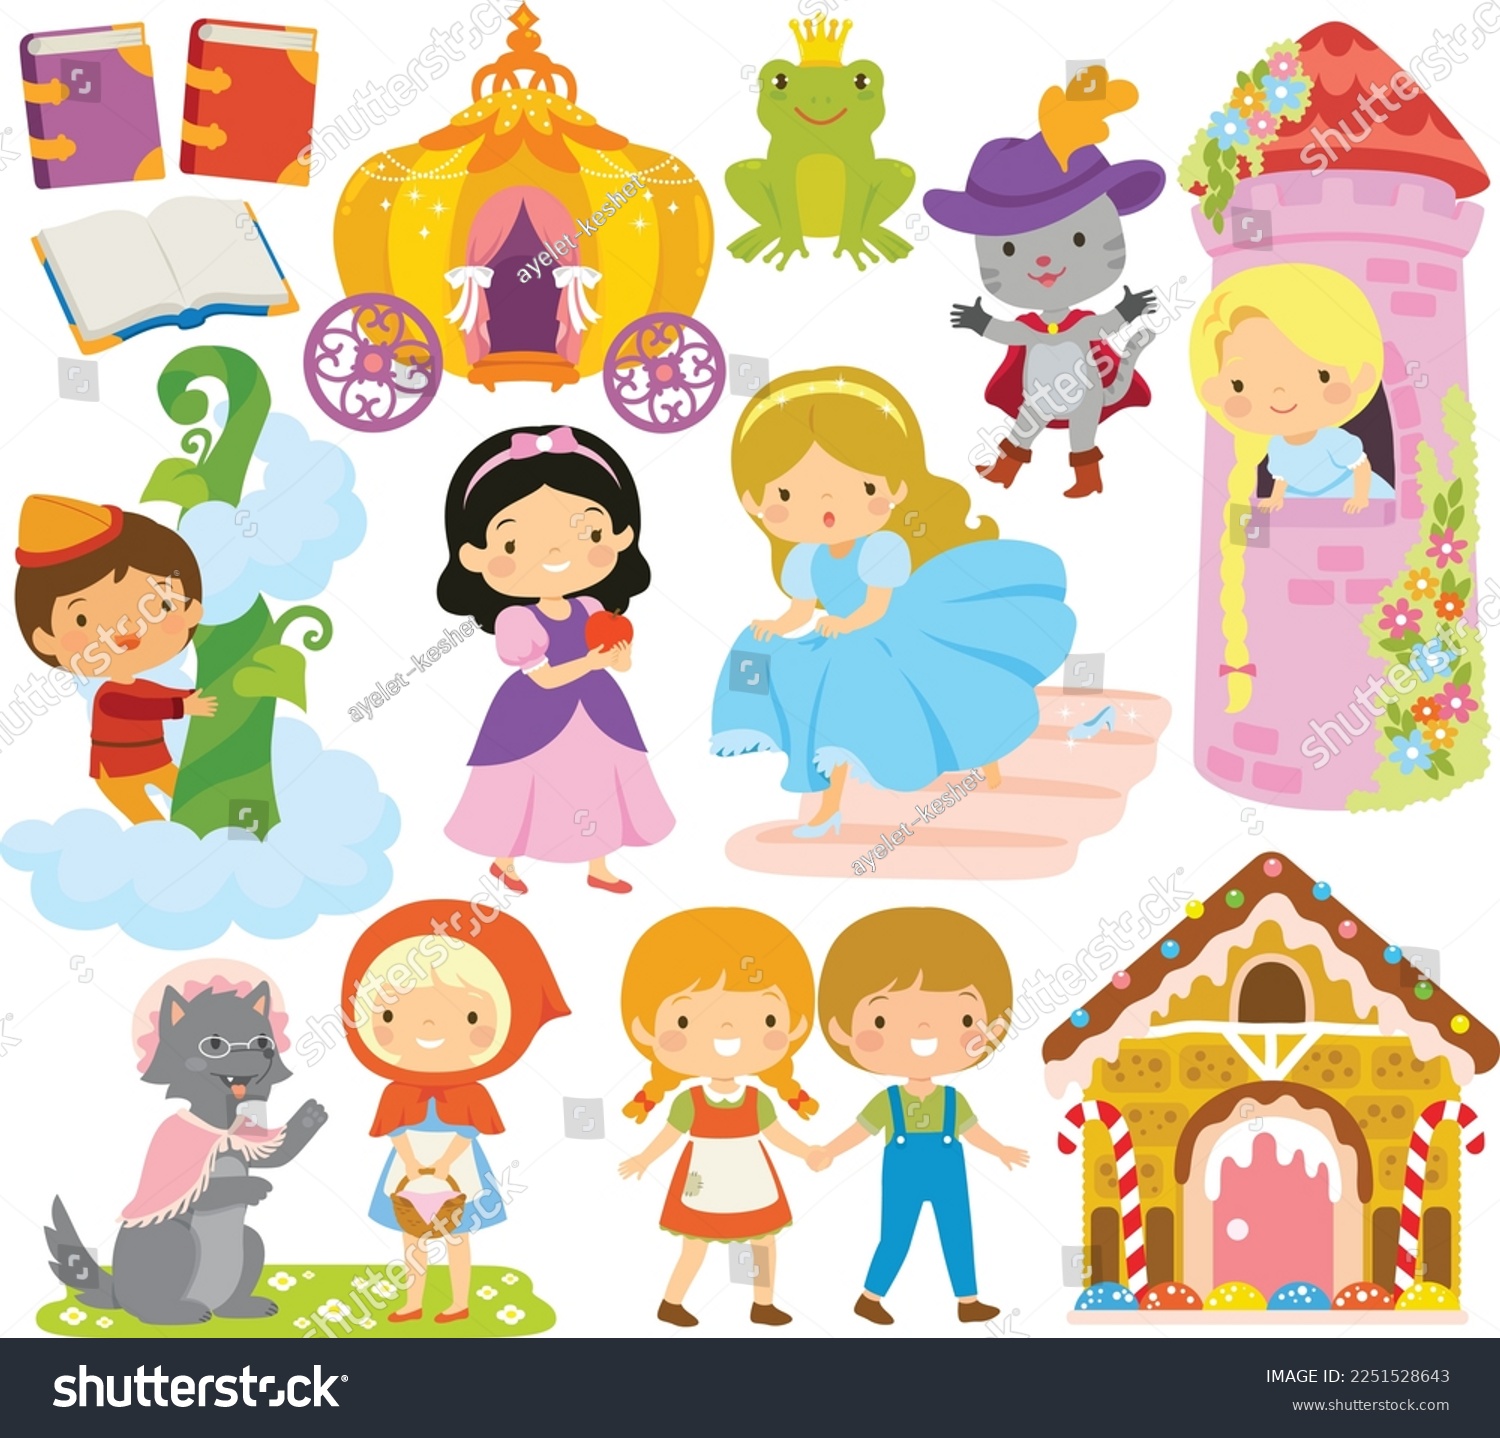 SVG of Fairy tales clipart set. Cute cartoon characters from famous folktales. svg